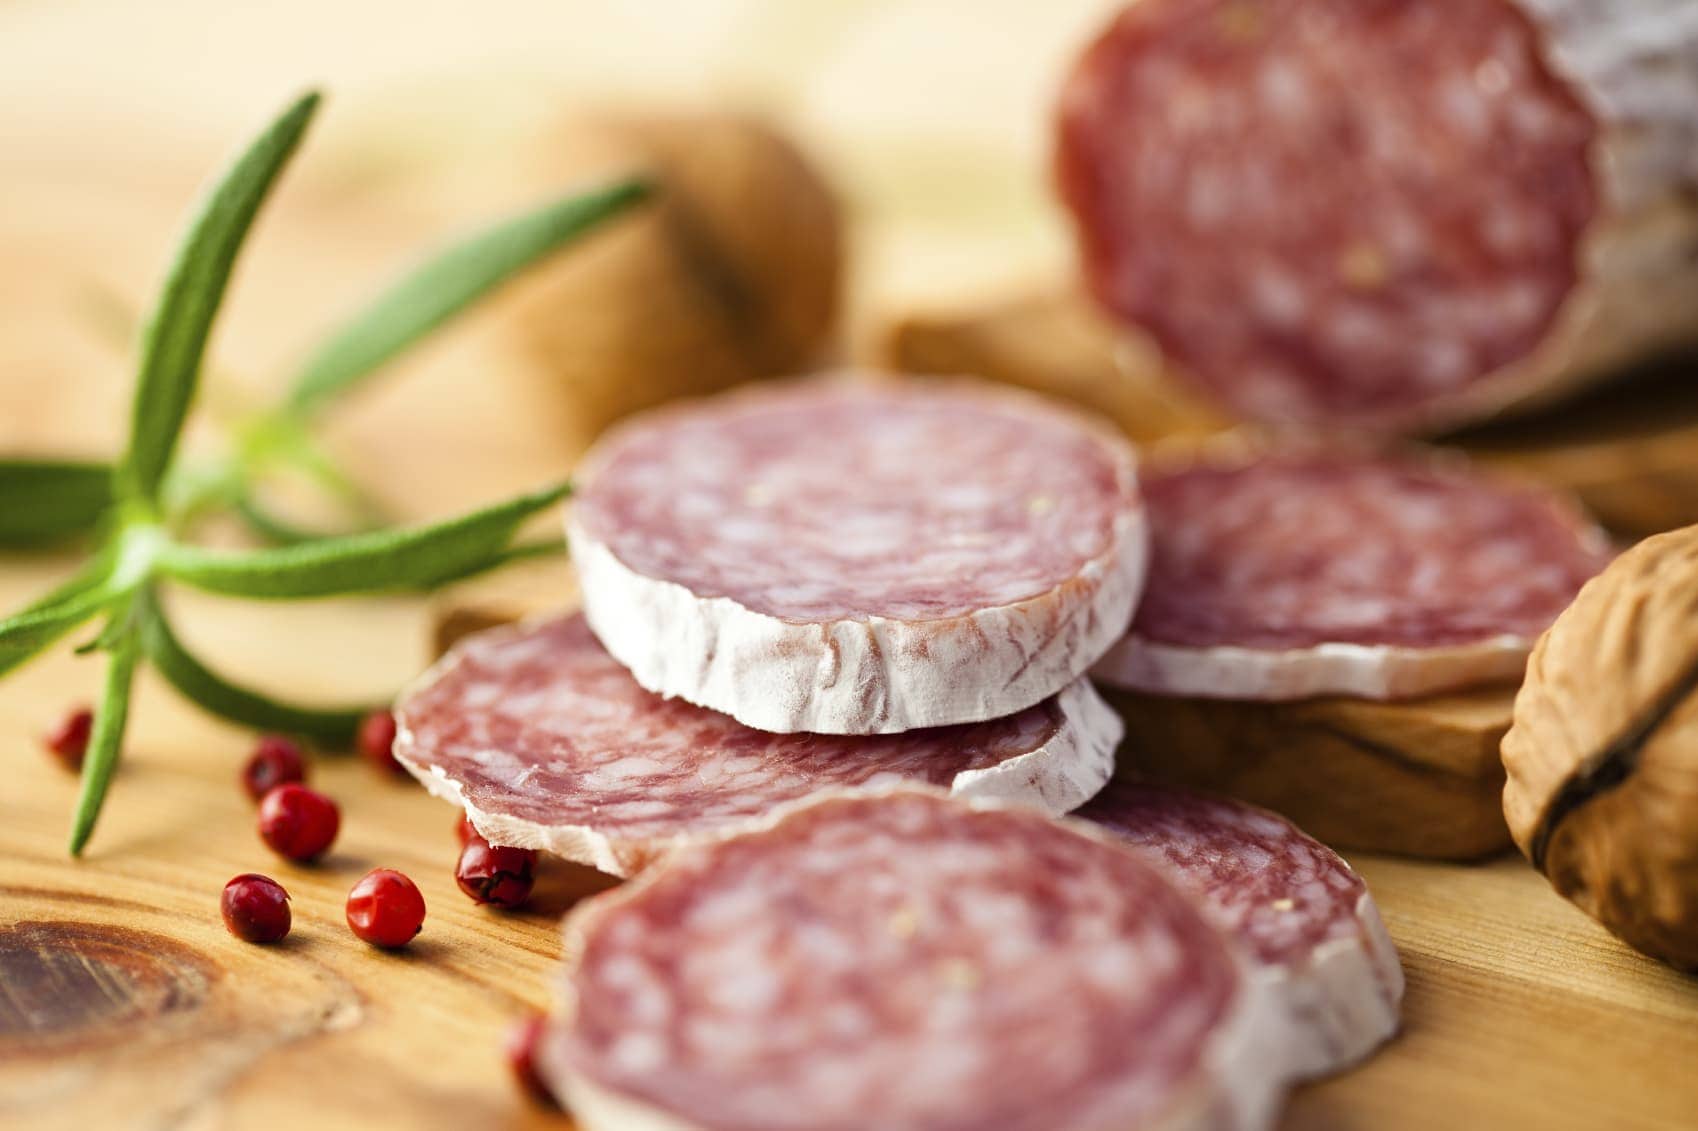 What is salami made of might surprise you.